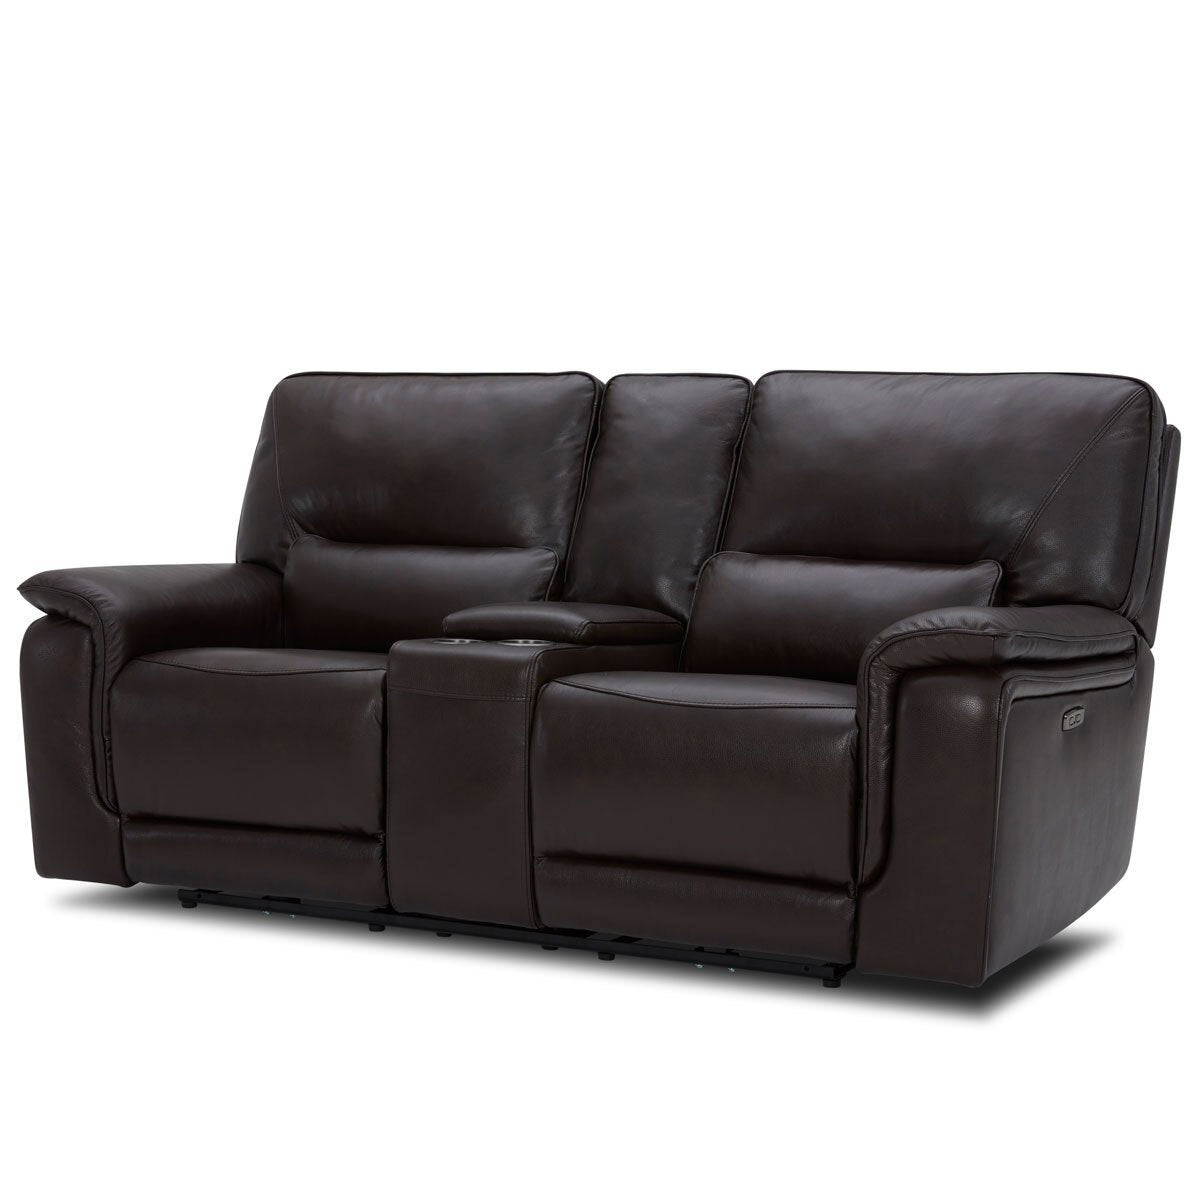 Gilman Creek Maxwell Brown Leather Power Recliner 2 Seater Sofa With Power Headrests - Signature Retail Stores